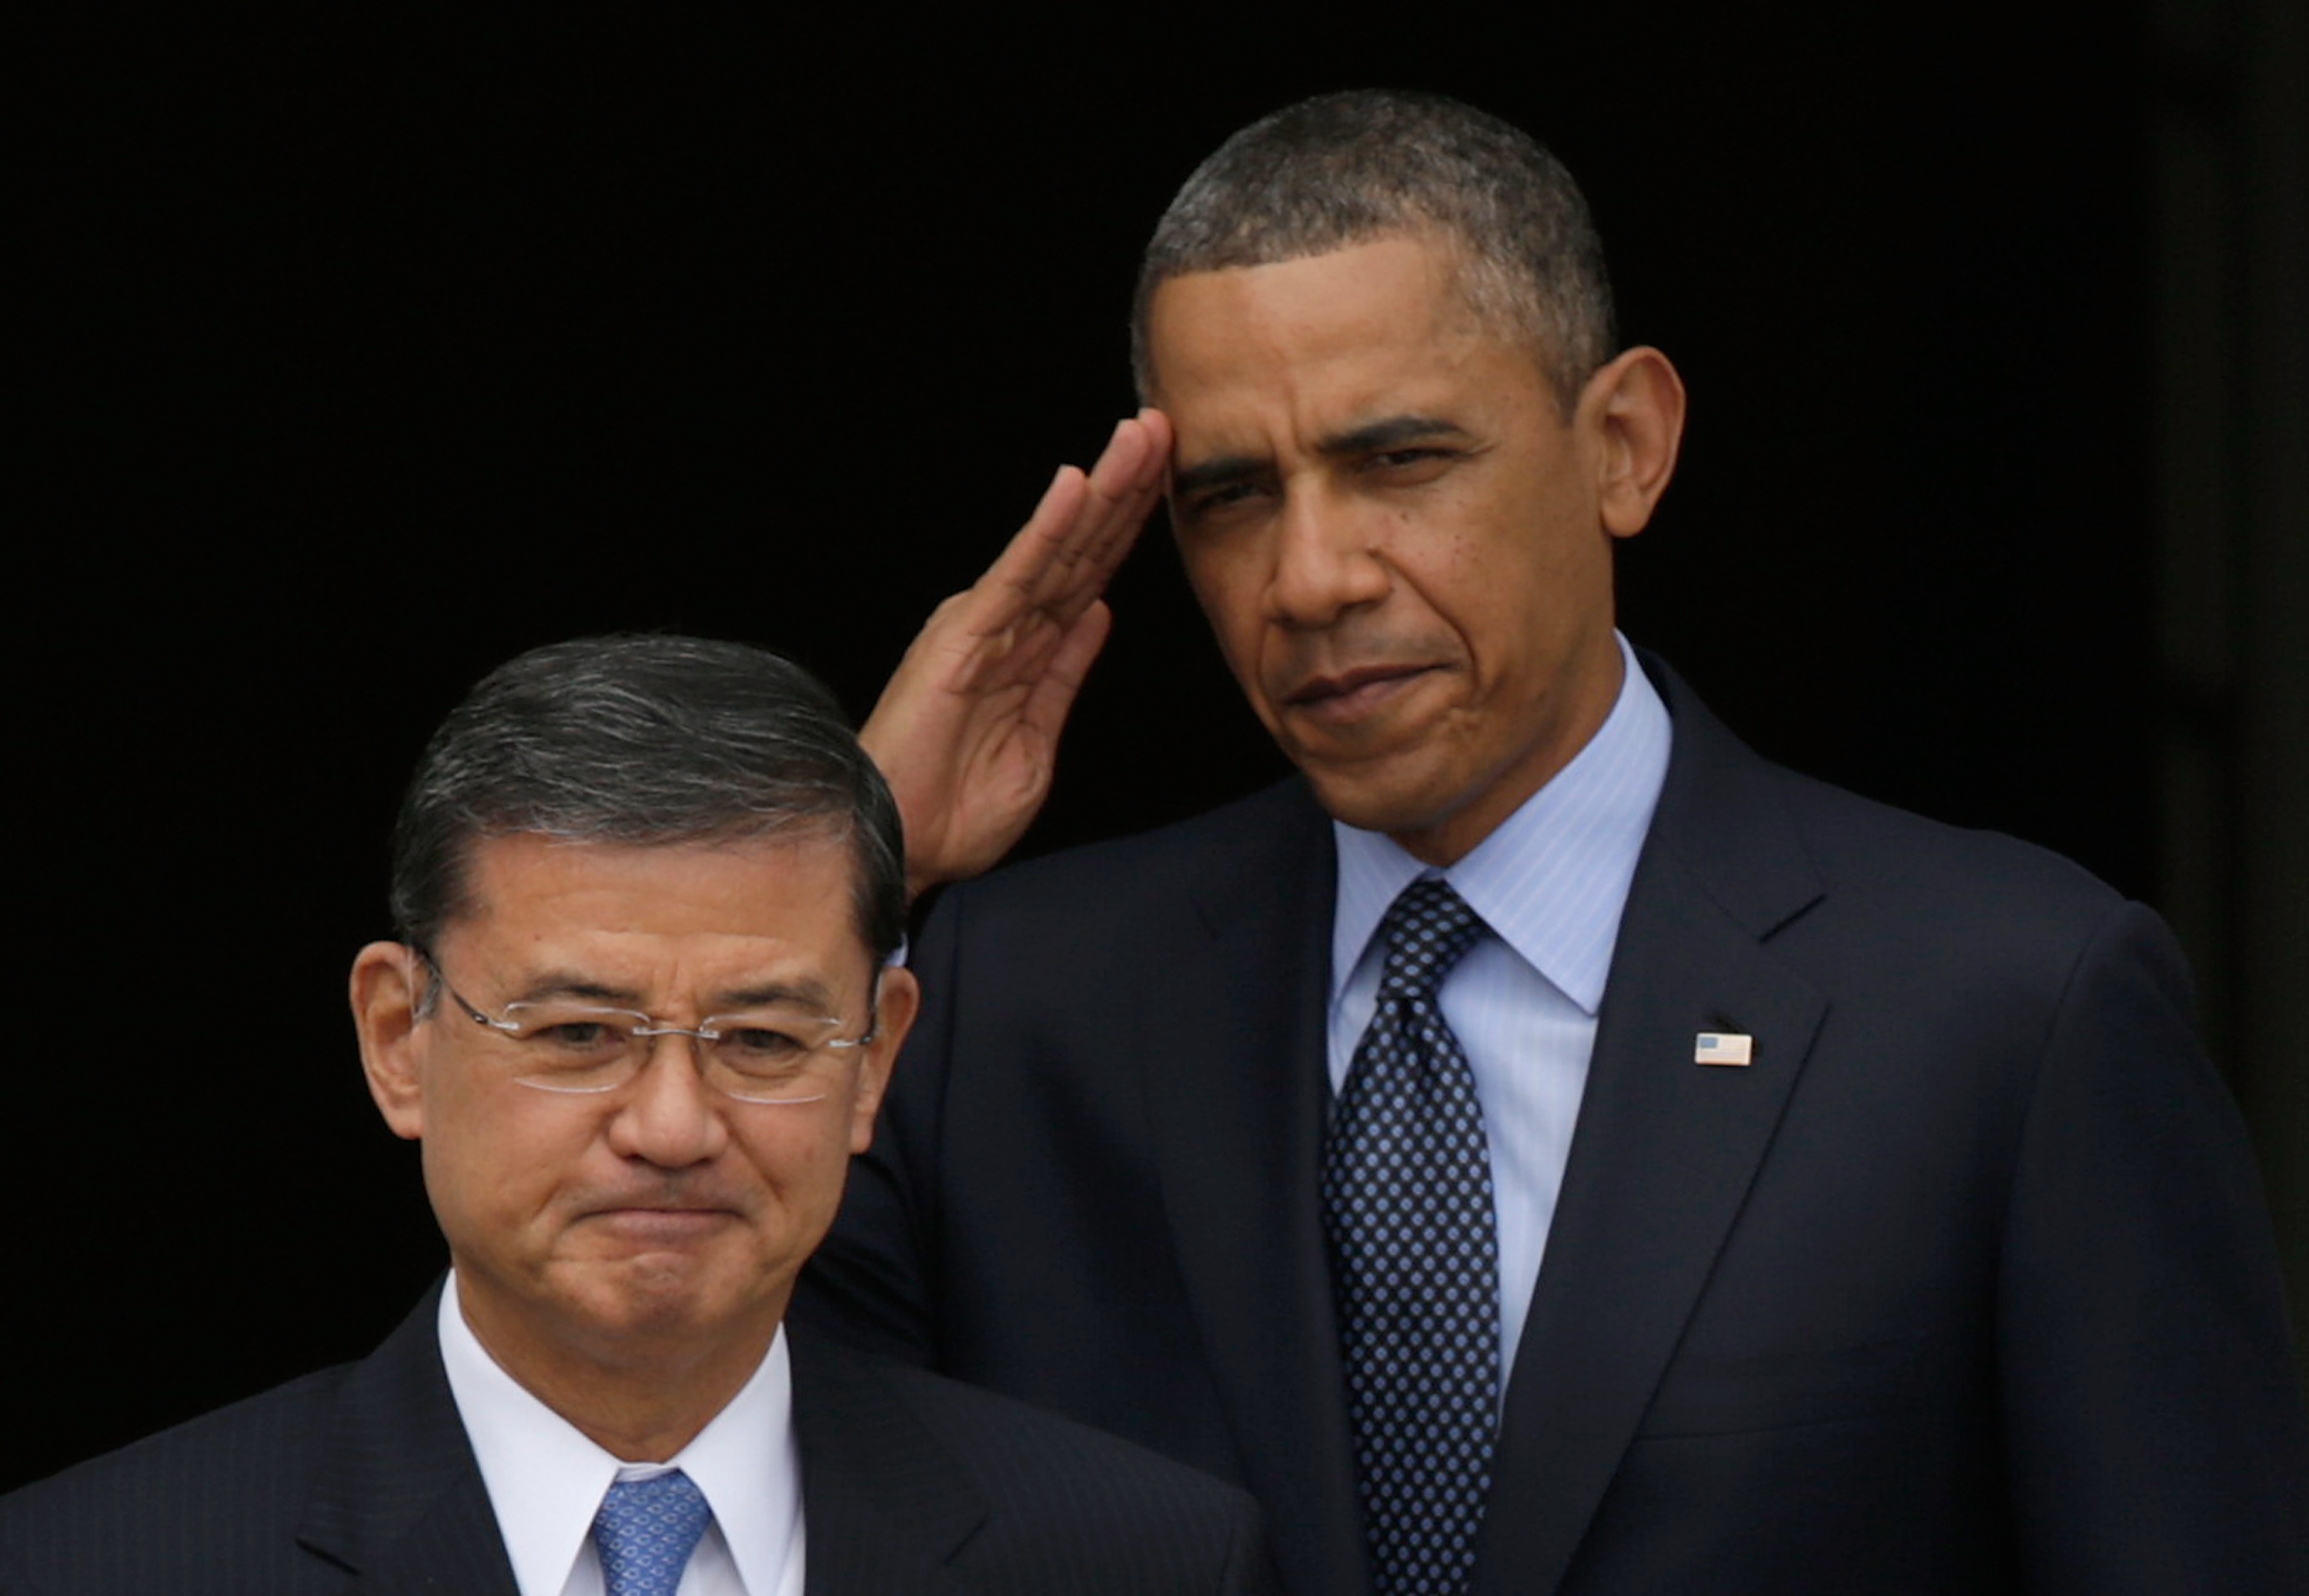 VA Secretary Eric Shinseki and President Obama at a veterans' event last year. (Win McNamee / Getty Images)